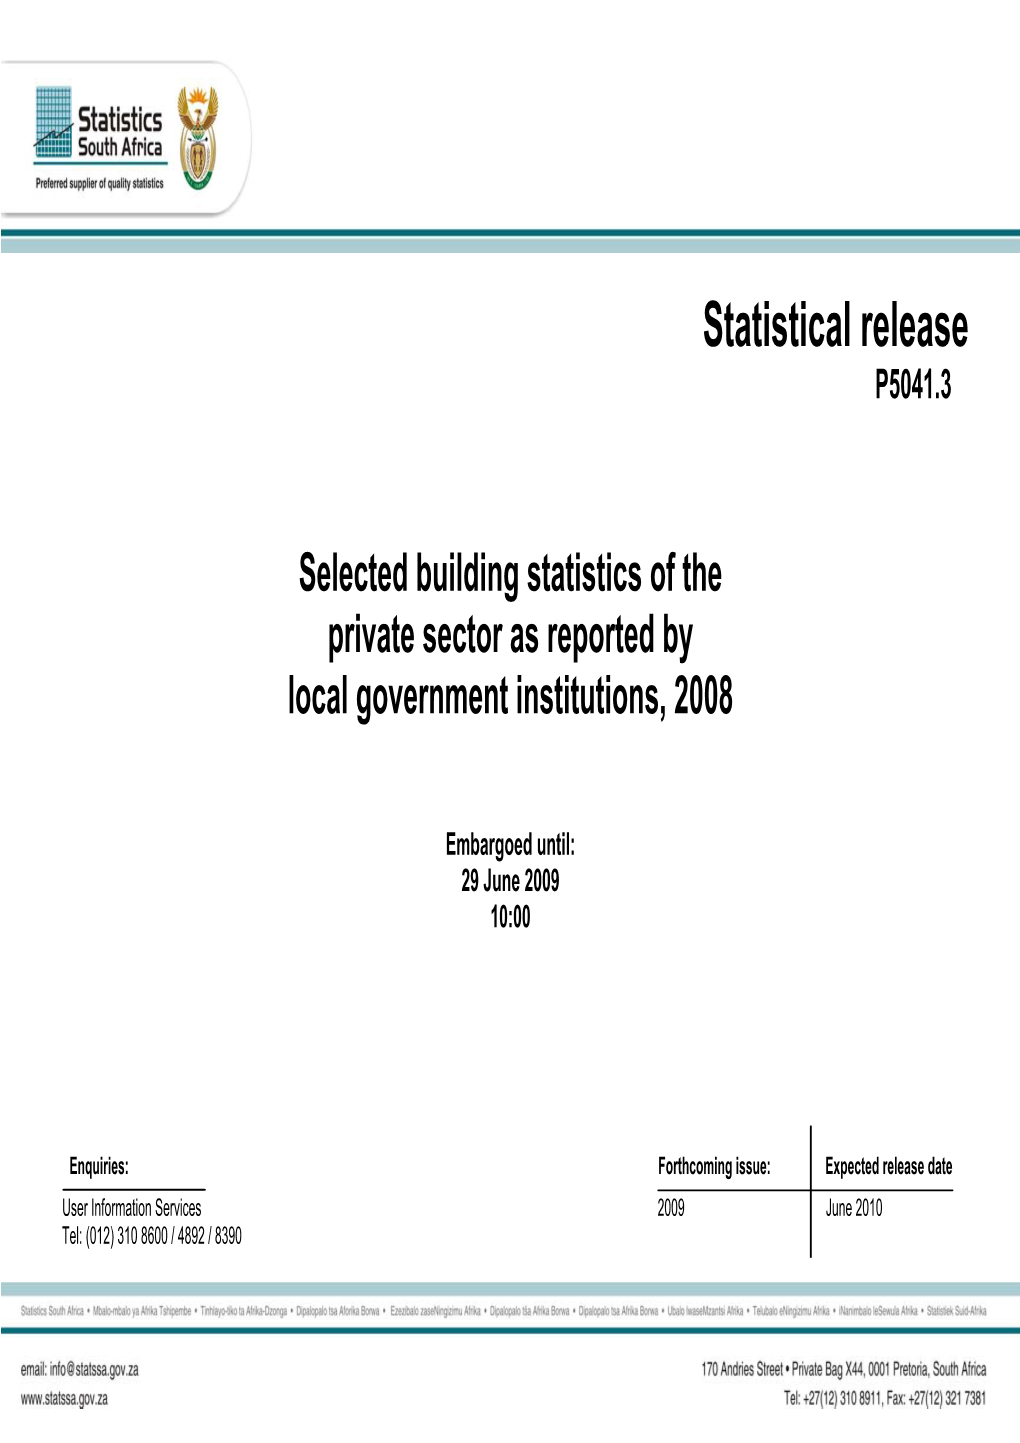 Selected Building Statistics of the Private Sector As Reported by Local Government Institutions, 2008